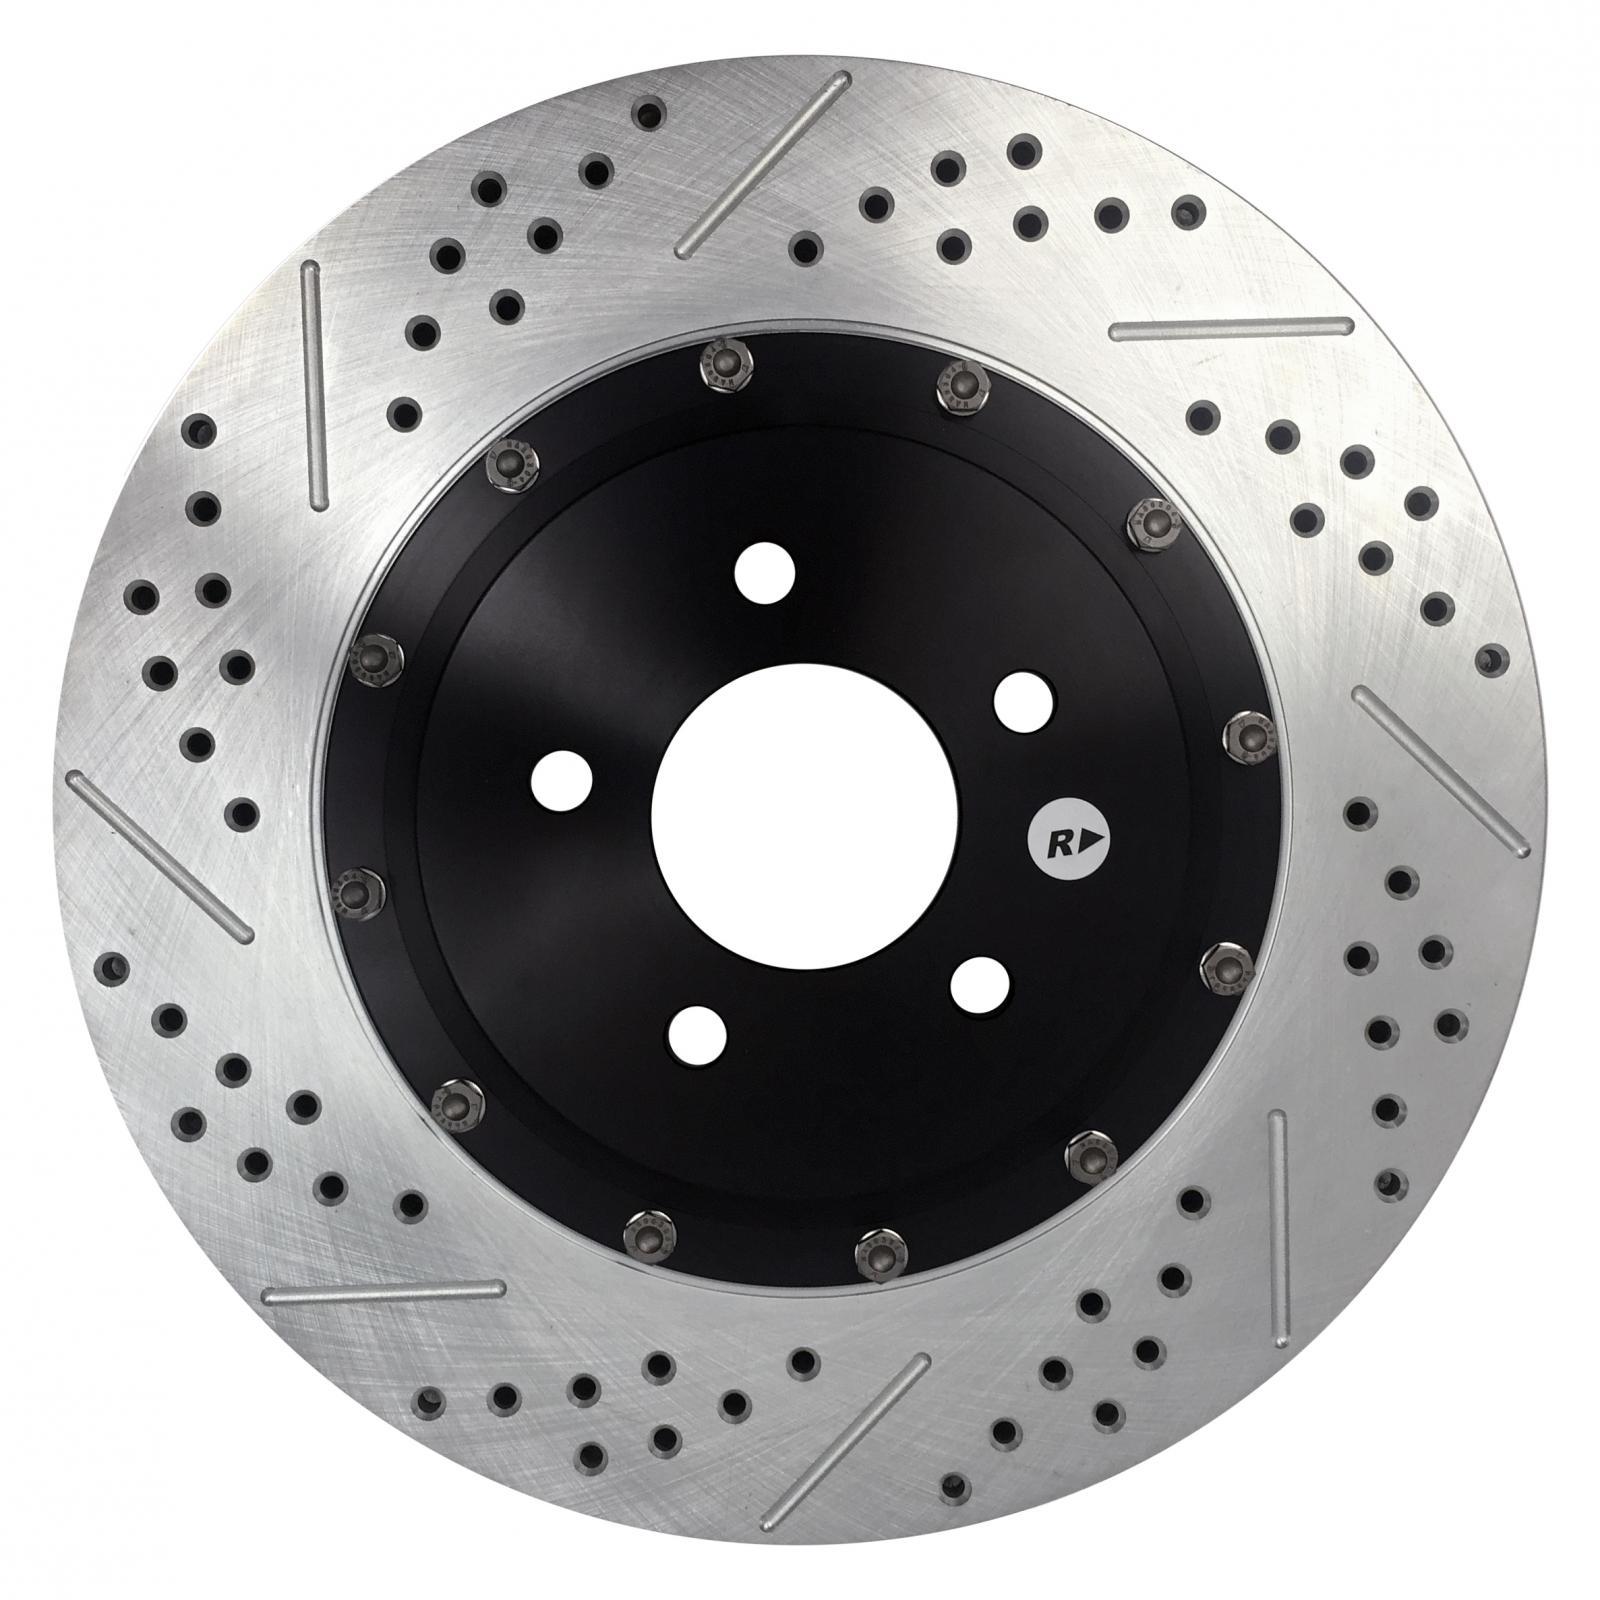 Baer Brakes 2261031 Brake Rotor, EradiSpeed +, Front, Directional / Drilled / Slotted, 14.000 in OD, 2-Piece, Iron, Zinc Plated, Ford Mustang 2007-12, Pair